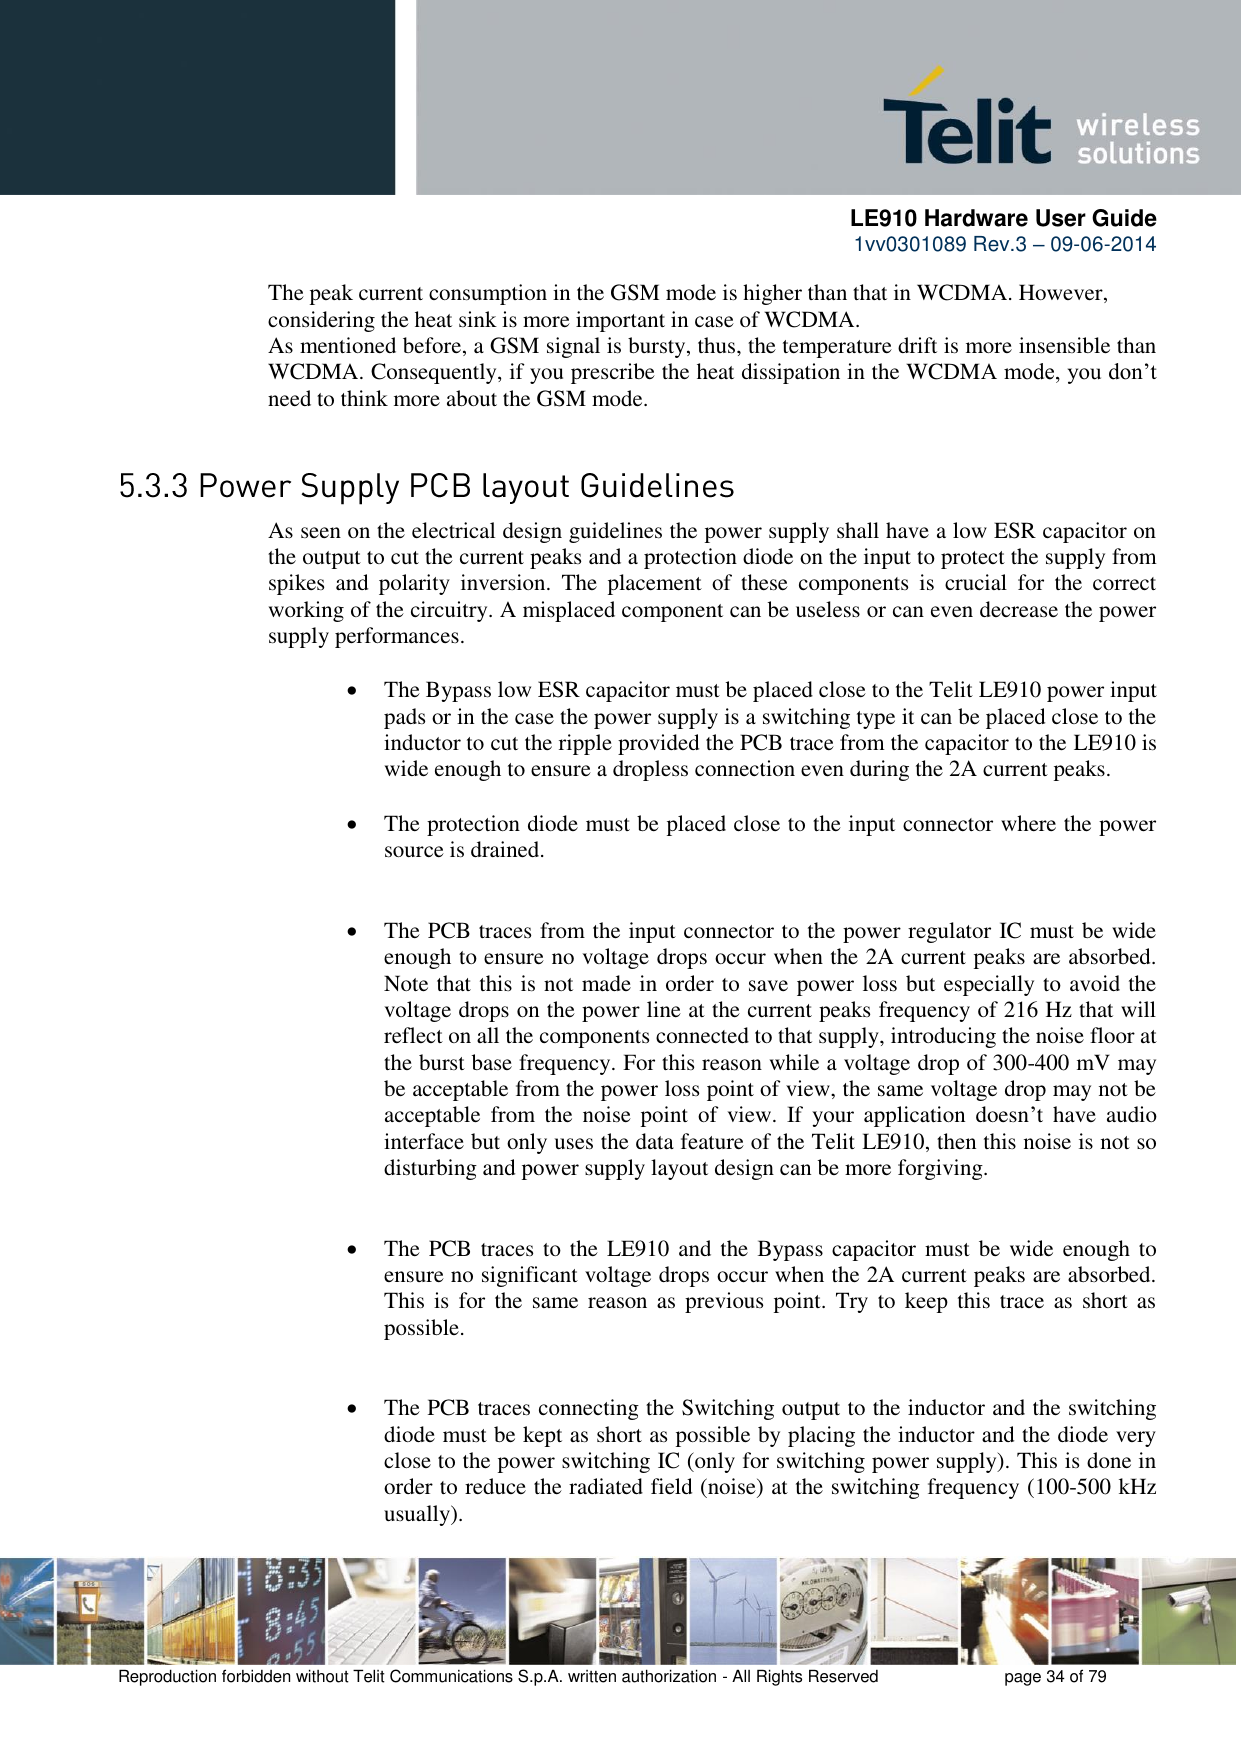      LE910 Hardware User Guide 1vv0301089 Rev.3 – 09-06-2014    Reproduction forbidden without Telit Communications S.p.A. written authorization - All Rights Reserved    page 34 of 79  The peak current consumption in the GSM mode is higher than that in WCDMA. However, considering the heat sink is more important in case of WCDMA.  As mentioned before, a GSM signal is bursty, thus, the temperature drift is more insensible than WCDMA. Consequently, if you prescribe the heat dissipation in the WCDMA mode, you don’t need to think more about the GSM mode.   As seen on the electrical design guidelines the power supply shall have a low ESR capacitor on the output to cut the current peaks and a protection diode on the input to protect the supply from spikes  and  polarity  inversion.  The  placement  of  these  components  is  crucial  for  the  correct working of the circuitry. A misplaced component can be useless or can even decrease the power supply performances.   The Bypass low ESR capacitor must be placed close to the Telit LE910 power input pads or in the case the power supply is a switching type it can be placed close to the inductor to cut the ripple provided the PCB trace from the capacitor to the LE910 is wide enough to ensure a dropless connection even during the 2A current peaks.   The protection diode must be placed close to the input connector where the power source is drained.    The PCB traces from the input connector to the power regulator IC must be wide enough to ensure no voltage drops occur when the 2A current peaks are absorbed. Note that this is not made in order to save power loss but especially to avoid the voltage drops on the power line at the current peaks frequency of 216 Hz that will reflect on all the components connected to that supply, introducing the noise floor at the burst base frequency. For this reason while a voltage drop of 300-400 mV may be acceptable from the power loss point of view, the same voltage drop may not be acceptable  from  the  noise  point  of  view.  If  your  application  doesn’t  have  audio interface but only uses the data feature of the Telit LE910, then this noise is not so disturbing and power supply layout design can be more forgiving.    The PCB traces to the  LE910 and the Bypass capacitor must be wide enough to ensure no significant voltage drops occur when the 2A current peaks are absorbed. This  is  for  the same  reason as  previous point. Try  to  keep this  trace  as short  as possible.    The PCB traces connecting the Switching output to the inductor and the switching diode must be kept as short as possible by placing the inductor and the diode very close to the power switching IC (only for switching power supply). This is done in order to reduce the radiated field (noise) at the switching frequency (100-500 kHz usually). 